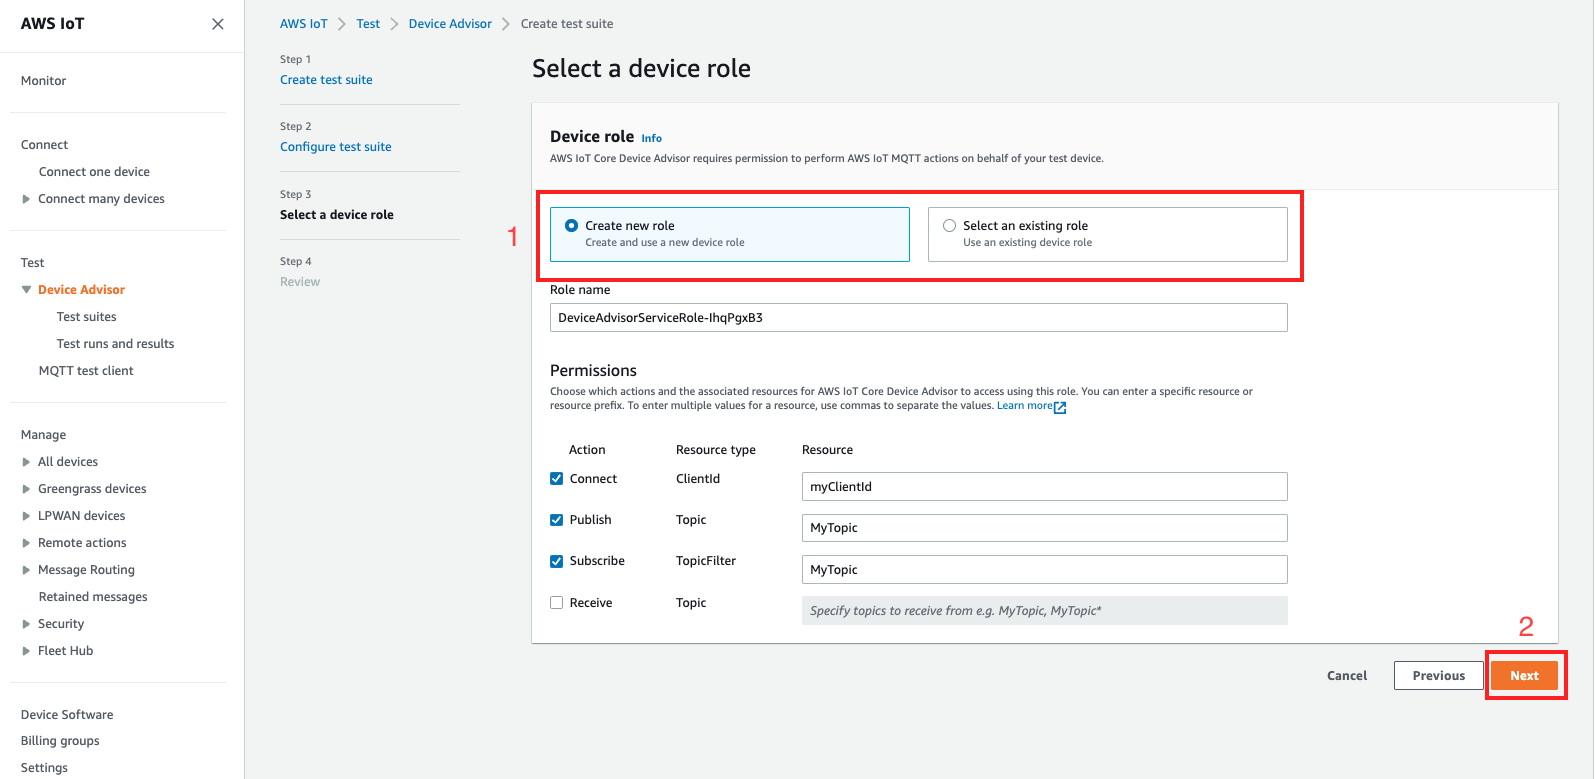 
                        The device role step where you can create a new role or select an existing role for the device being tested. 
                            The role grants permissions for Device Advisor to perform MQTT actions like Connect, Publish, and Subscribe on behalf of the test device.
                    